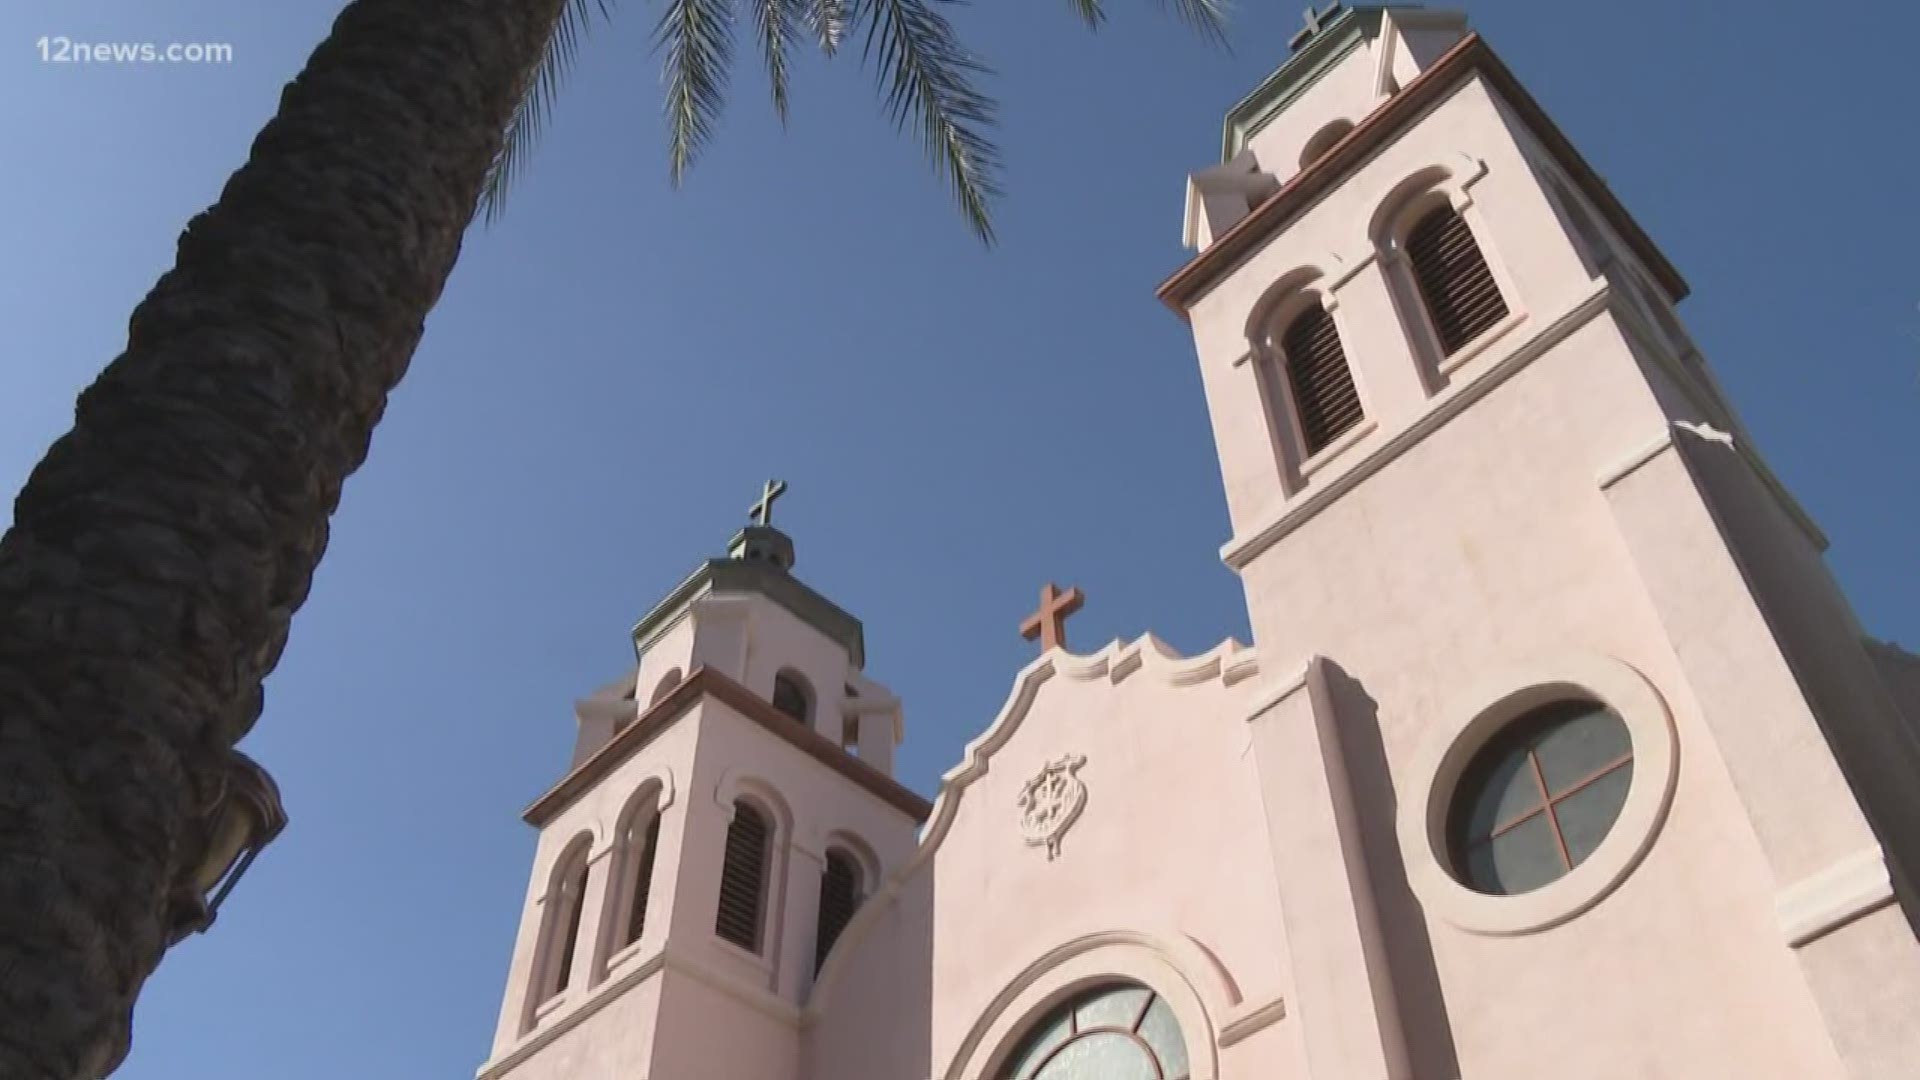 In a one-on-one interview, Bishop Thomas Olmsted acknowledged the sex abuse happening within the Catholic church and talked about the resources the Roman Catholic Diocese of Phoenix is providing to victims.